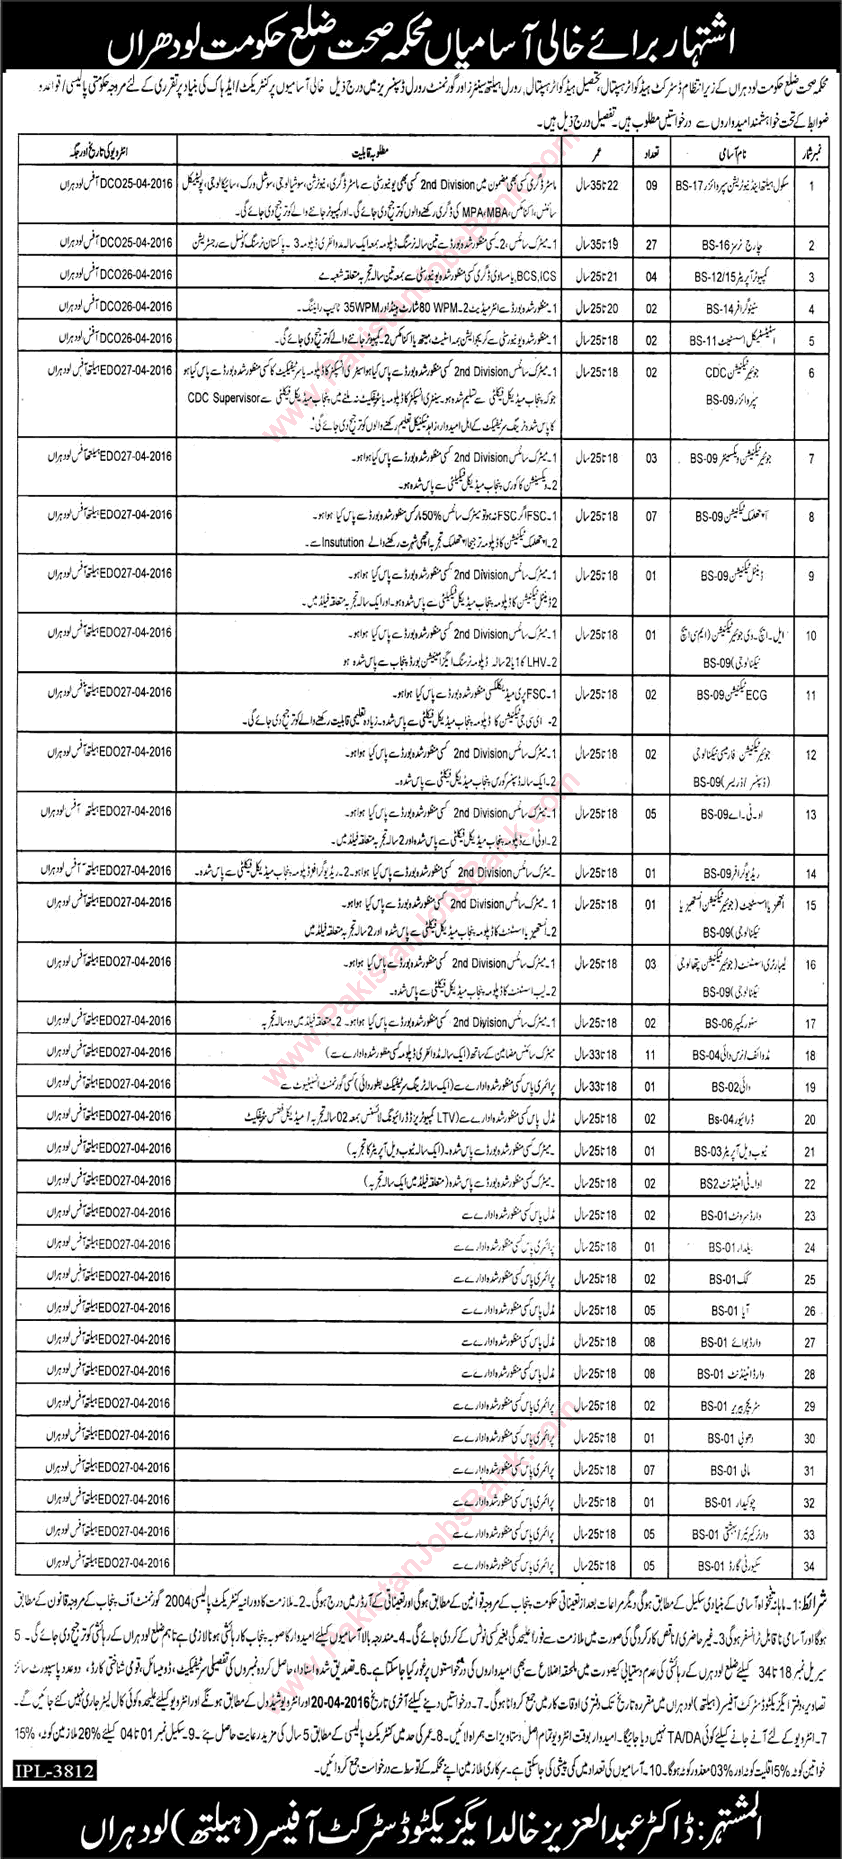 Health Department Lodhran Jobs 2016 April Charge Nurses, Medical Technicians, Midwives & Others Latest